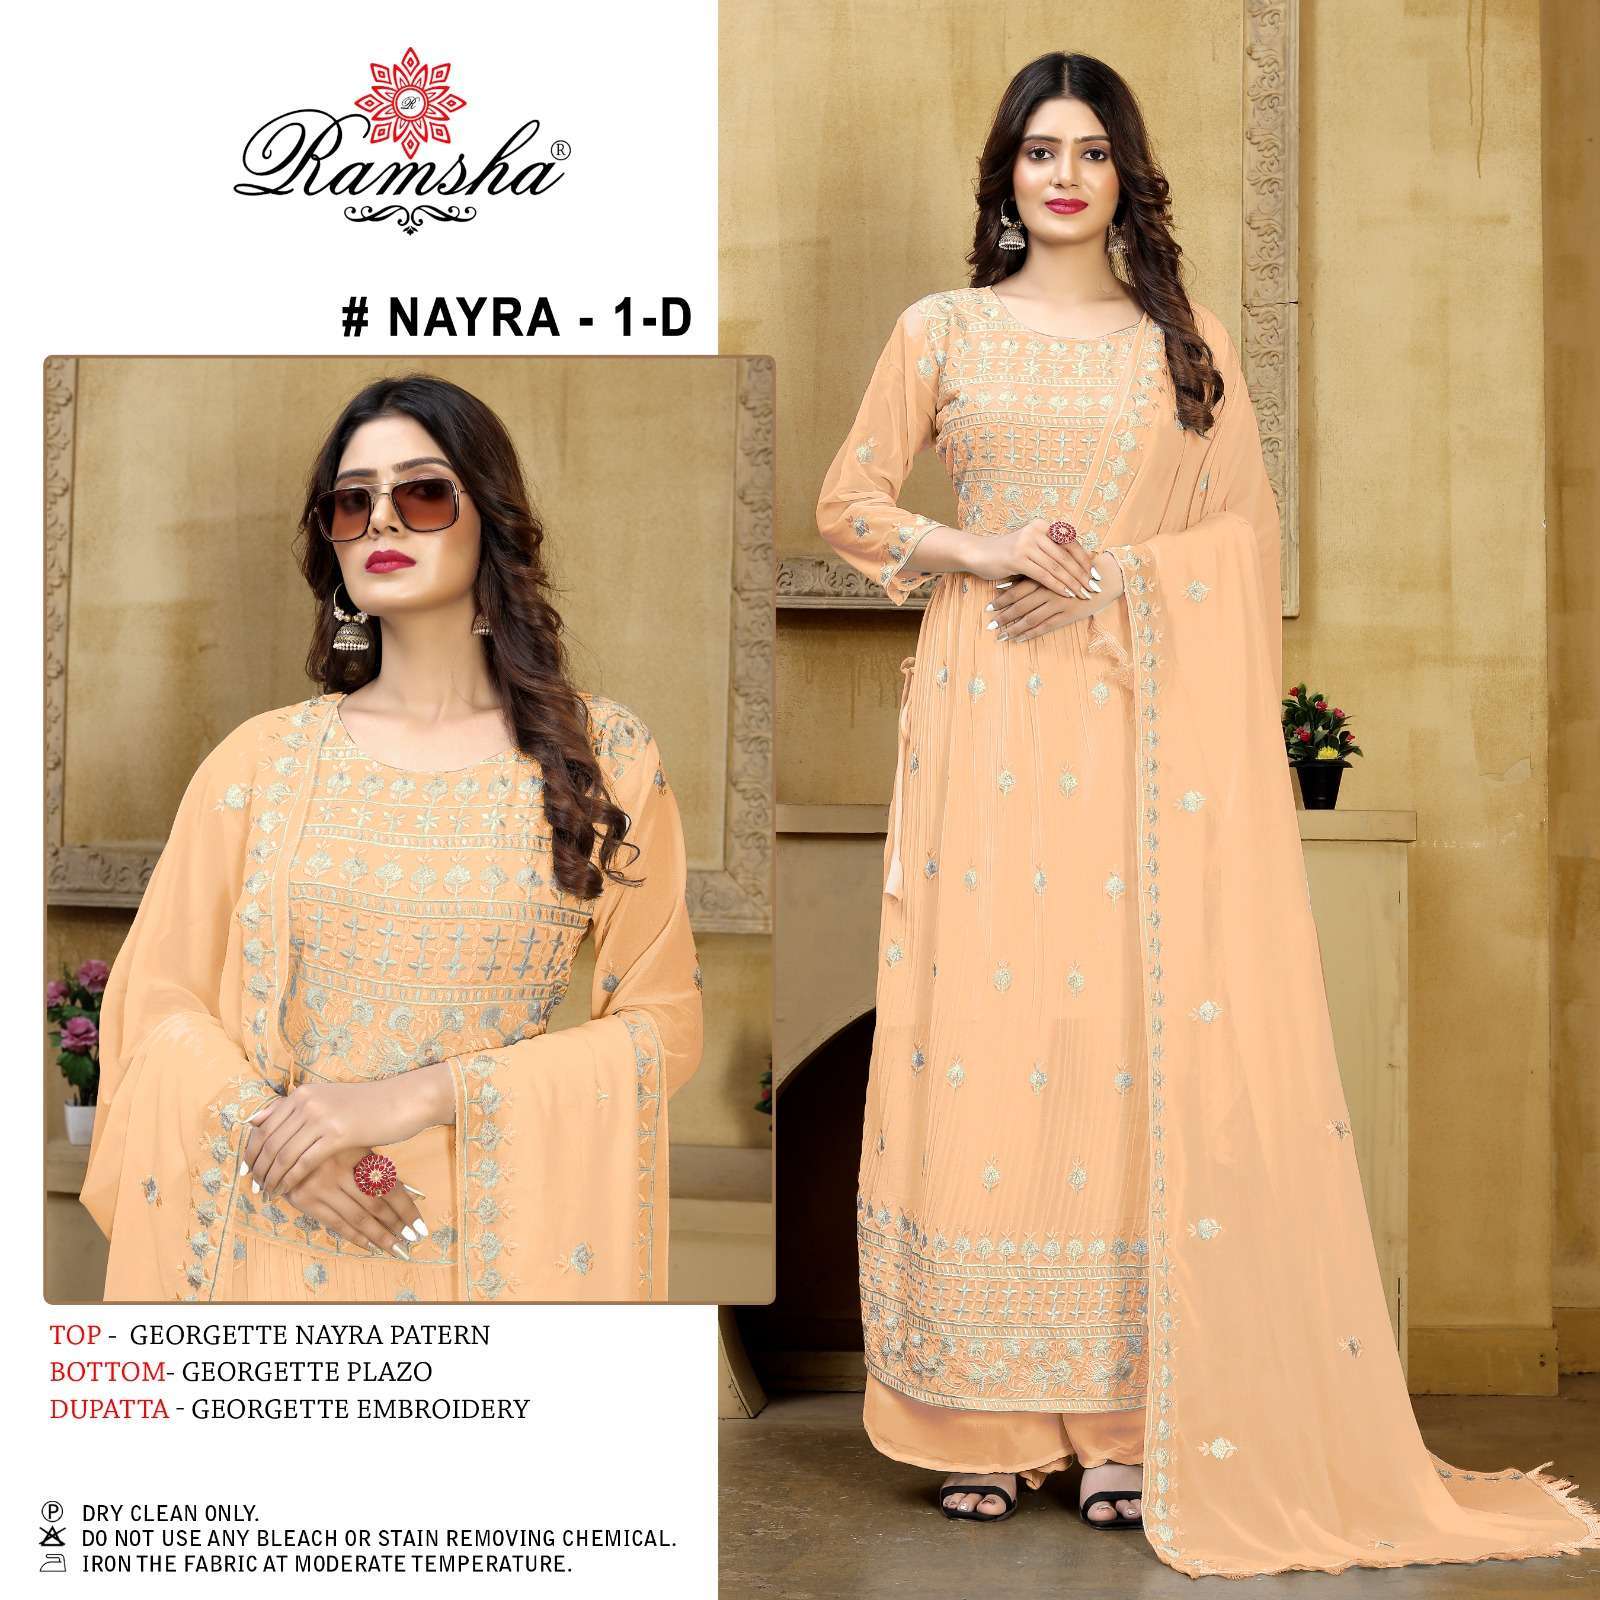 Ramsha Nayra Vol 1 Georgette with fancy work Pakistani suits...